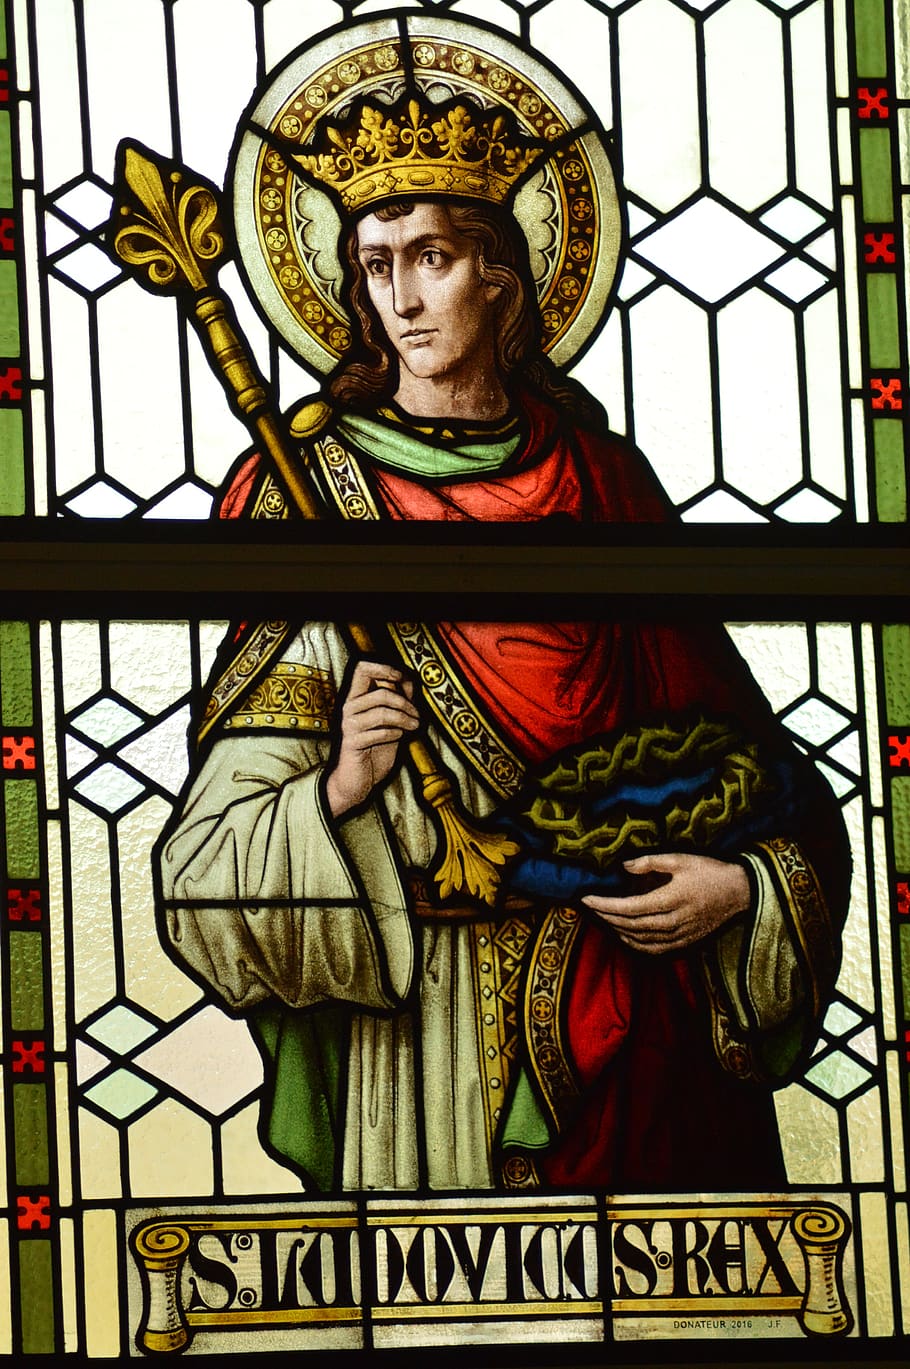 stained glass, window, church, saint, man, king, ludovic, sceptre, faith, crown